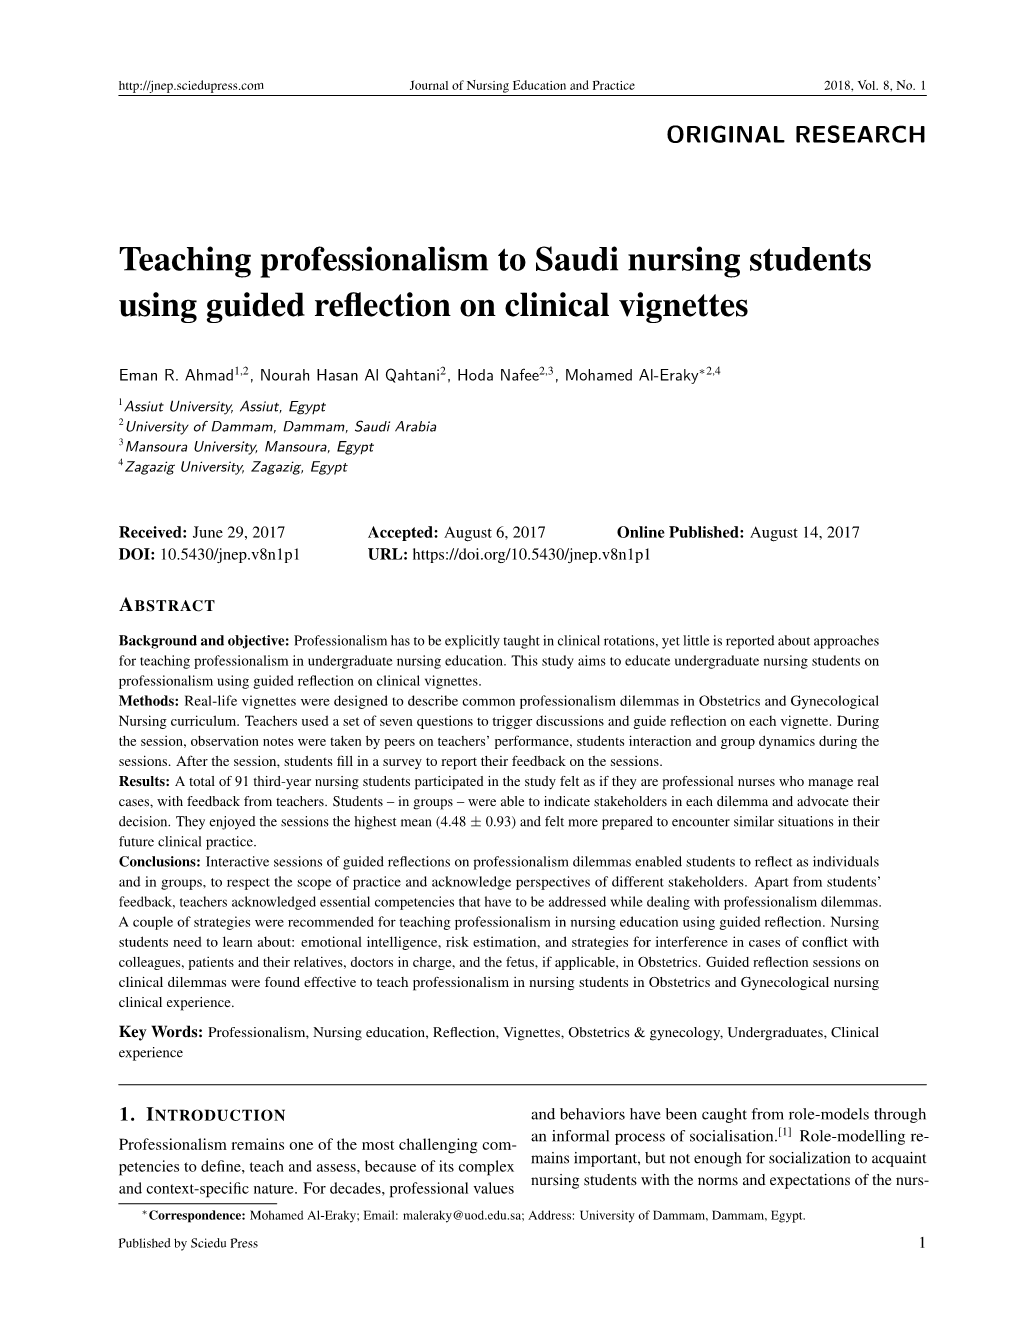 Teaching Professionalism to Saudi Nursing Students Using Guided Reﬂection on Clinical Vignettes